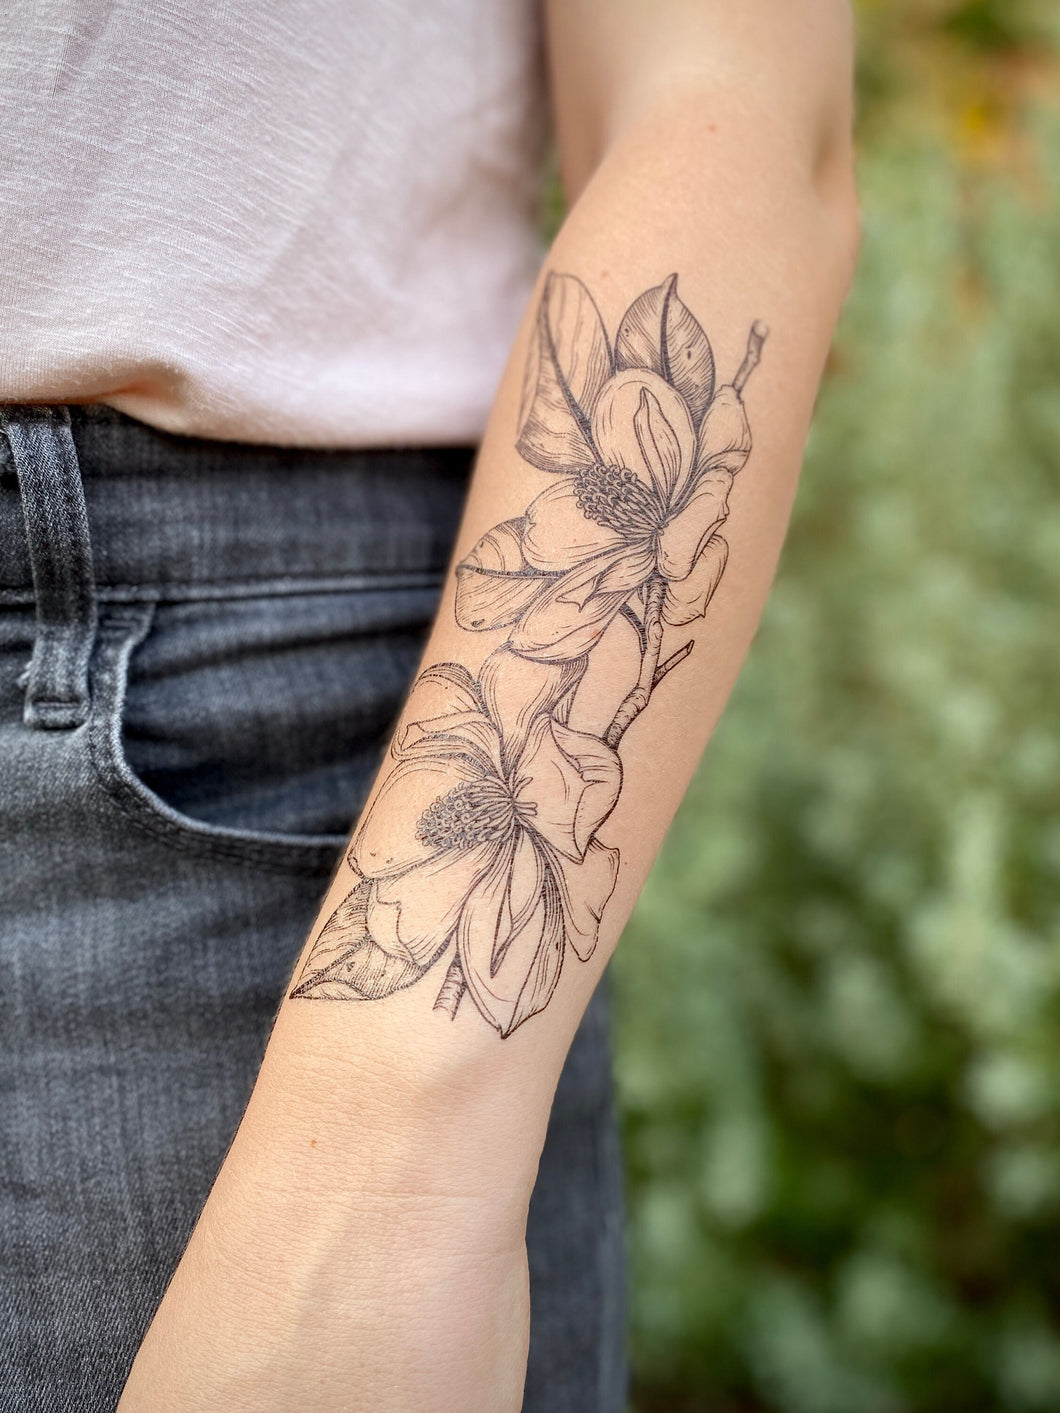 Colour tattoo for women, Floral tattoo sleeve, Flower tattoo shoulder